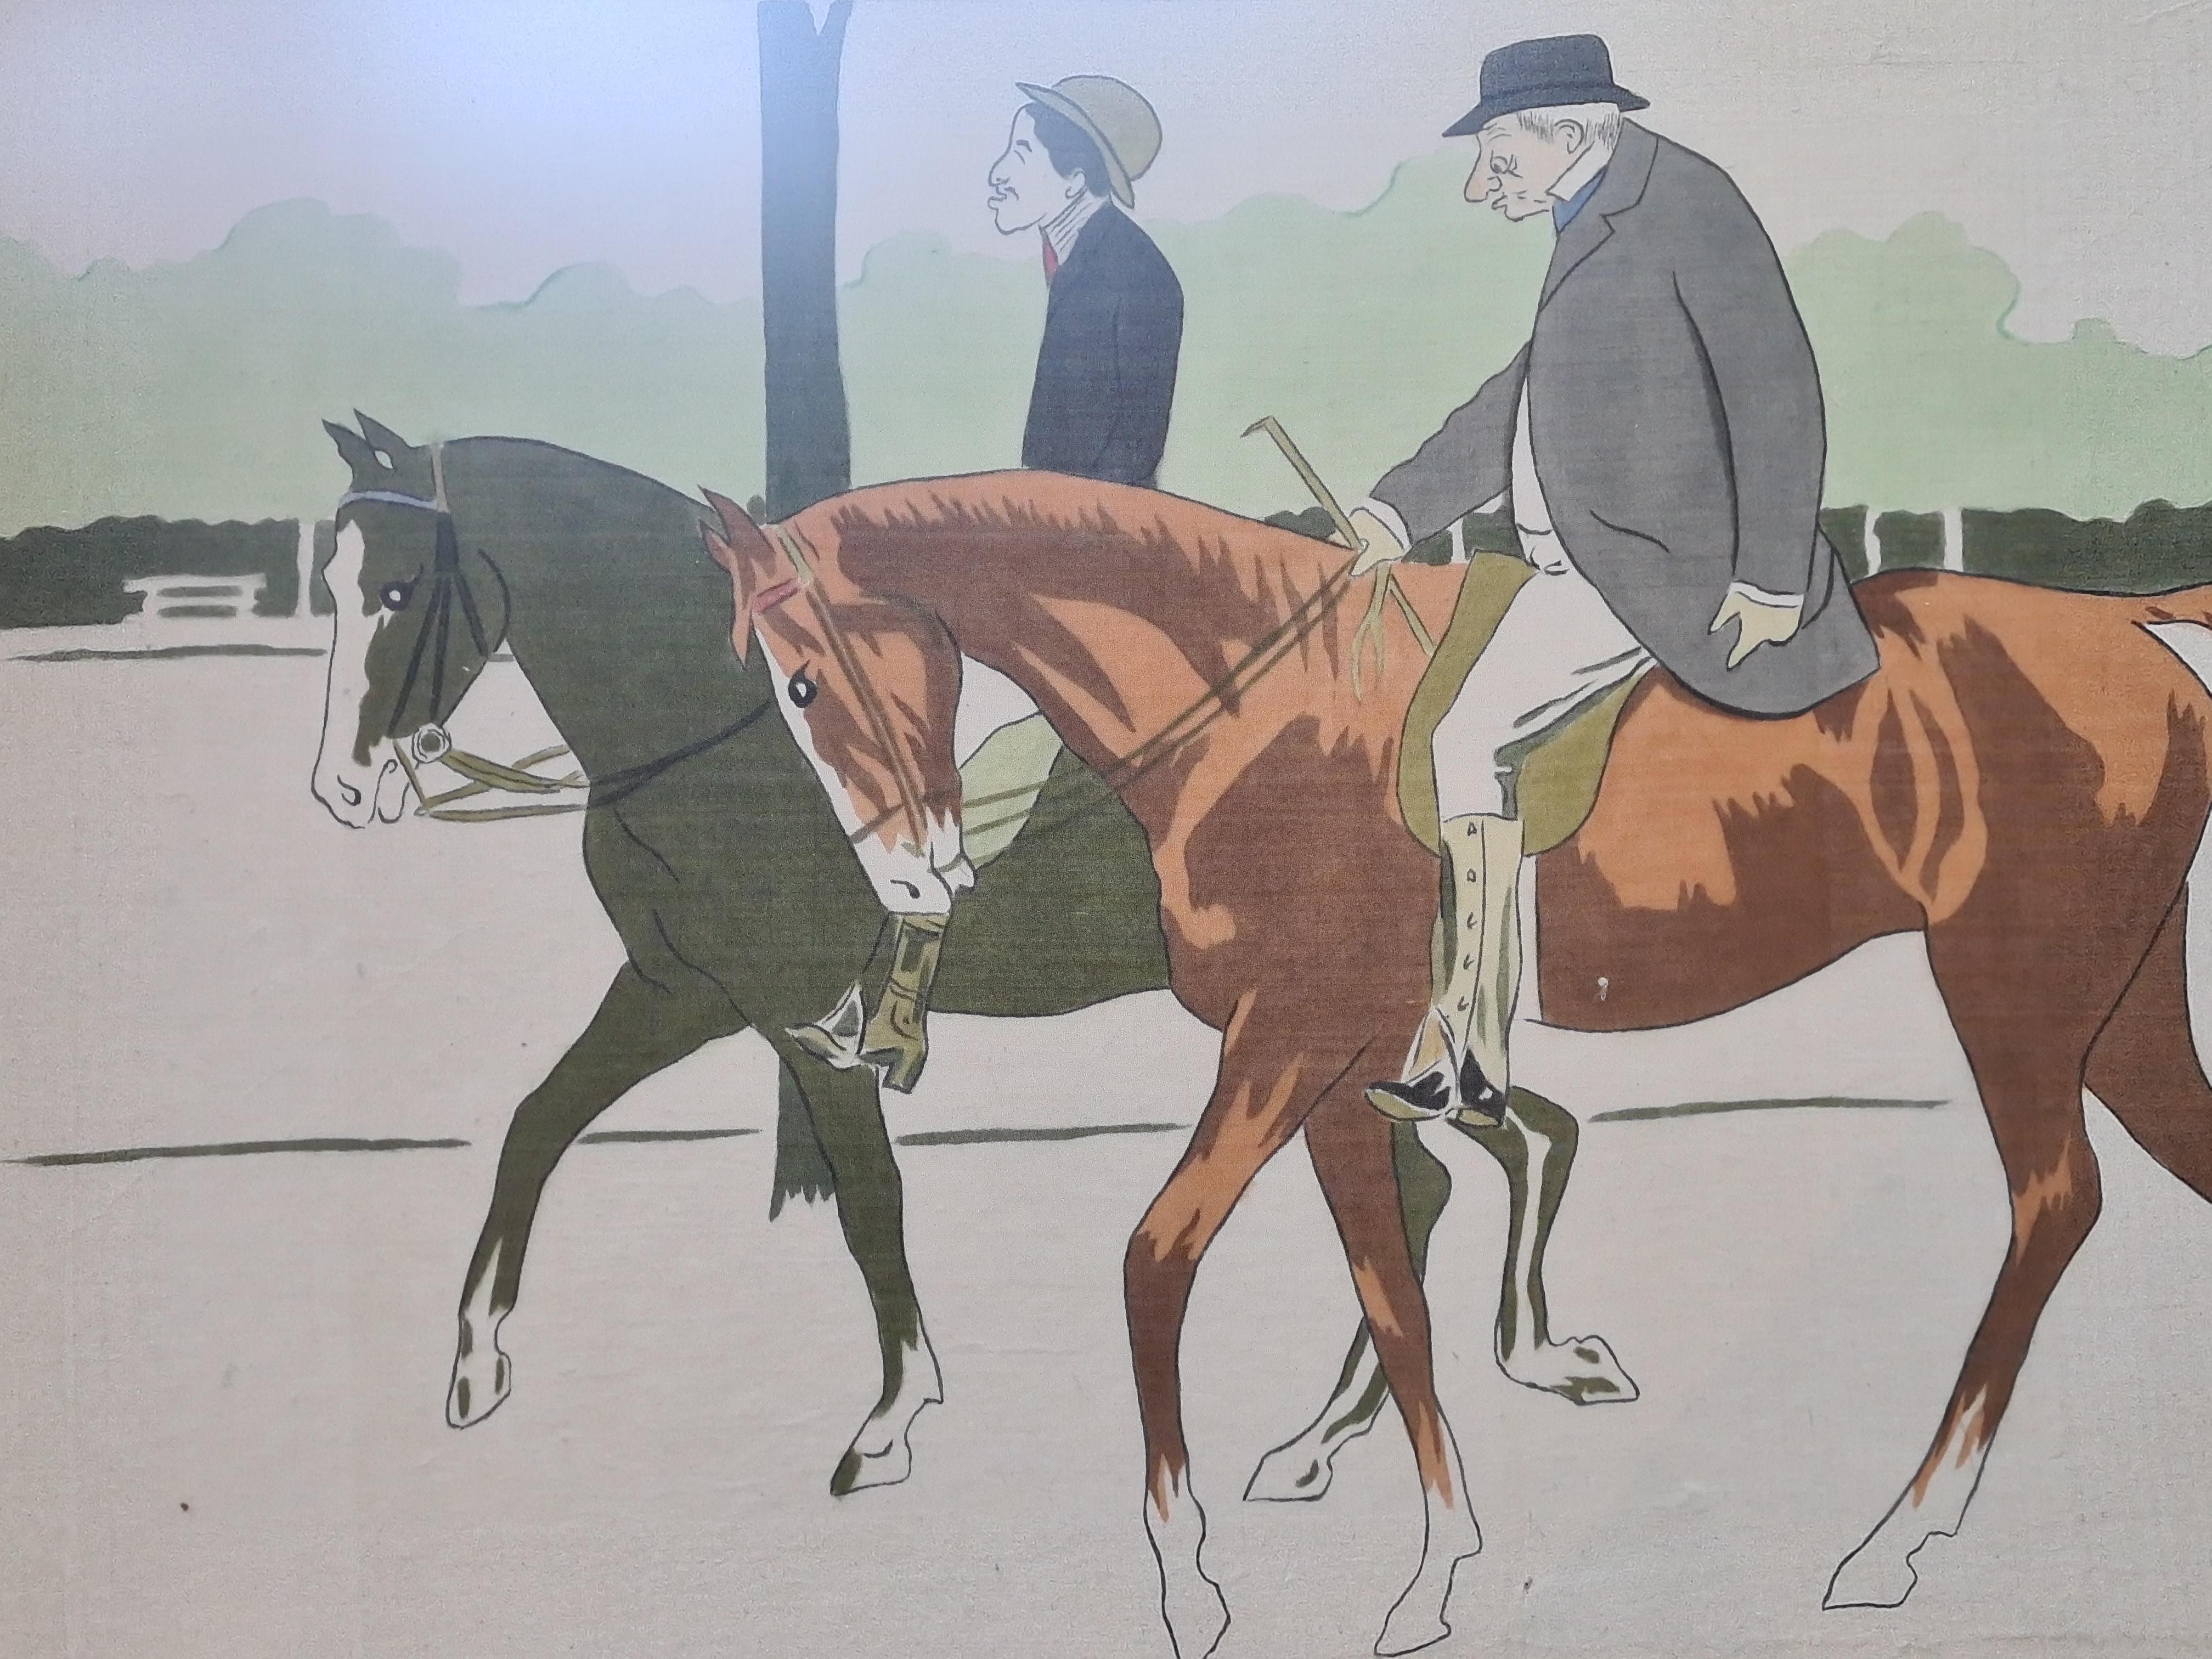 Watercolour and gouache on handmade paper portrait of two riders and their horses by La Roche Laffitte. The watercolour is not signed but was purchased in a collection of signed works by the artist.

A very charming caricature portrait of two